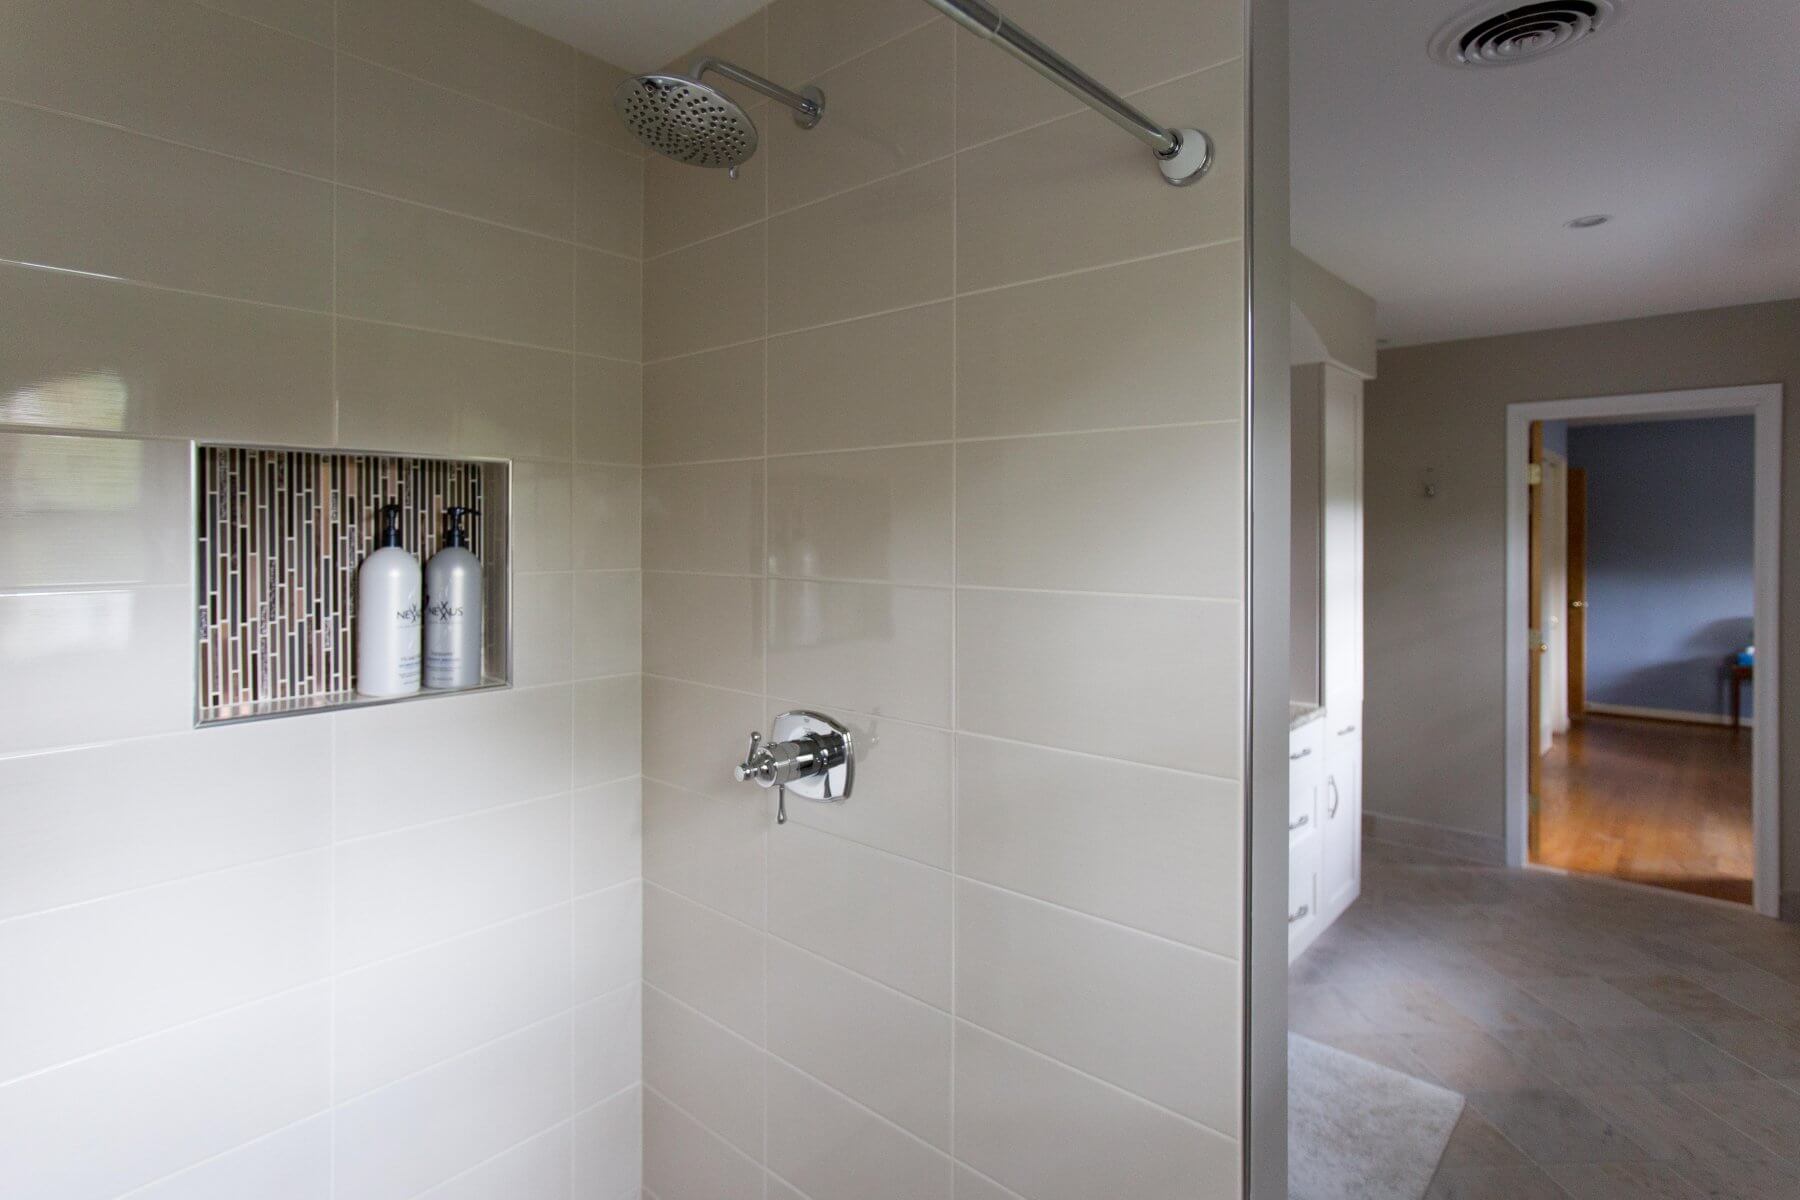 a bathroom with a shower head and tiled walls